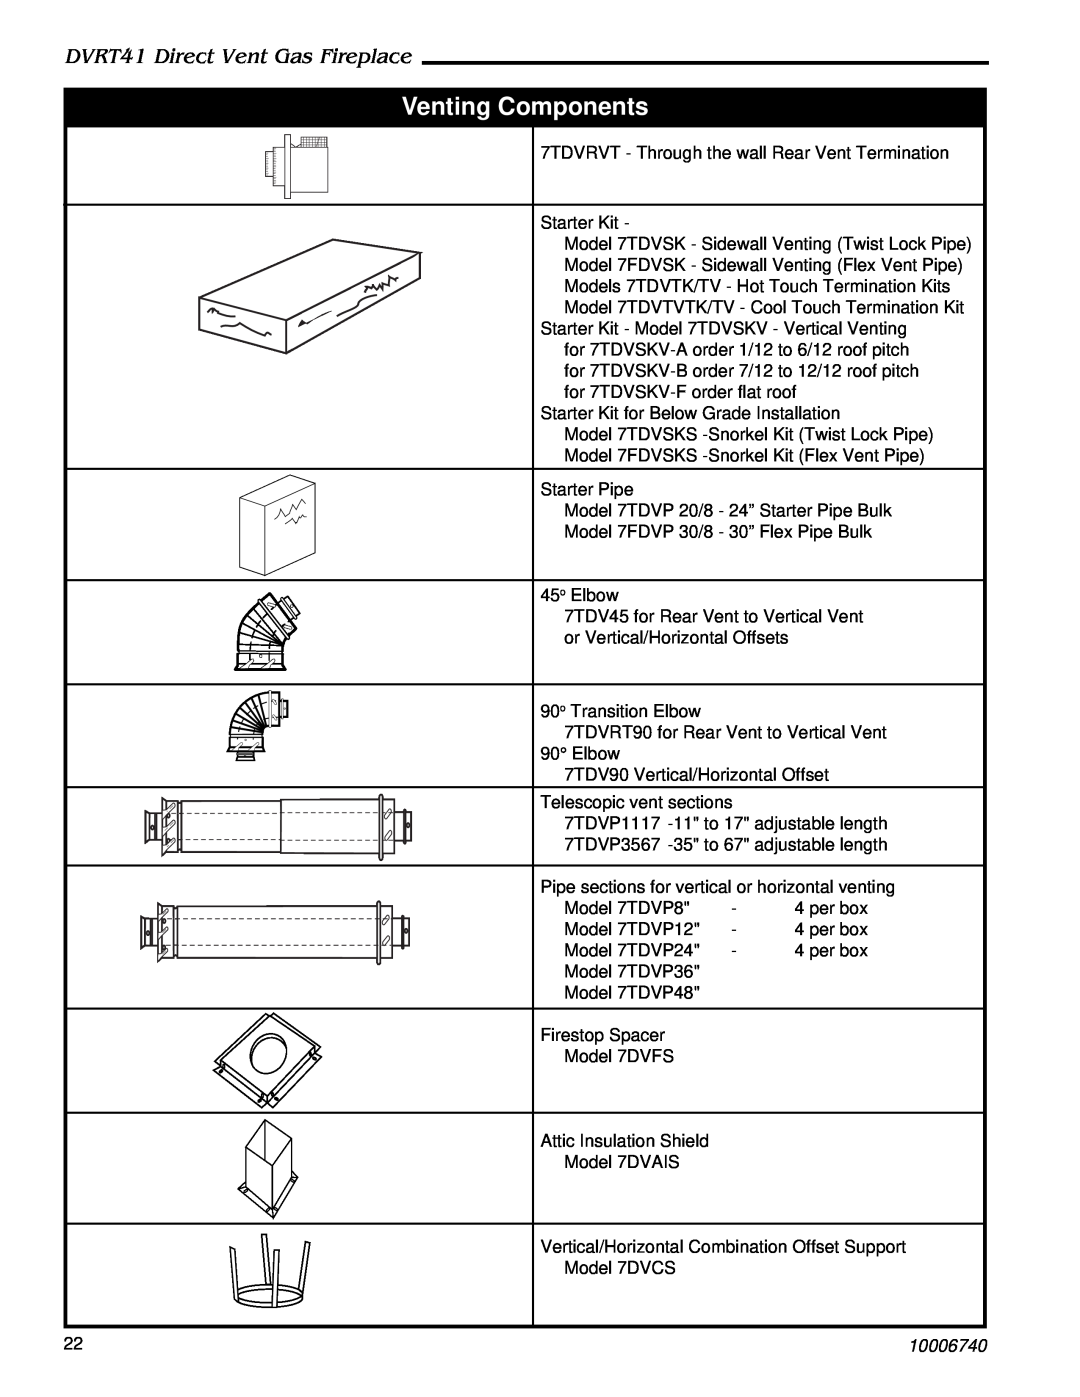 Vermont Casting manual Venting Components, DVRT41 Direct Vent Gas Fireplace, 10006740 